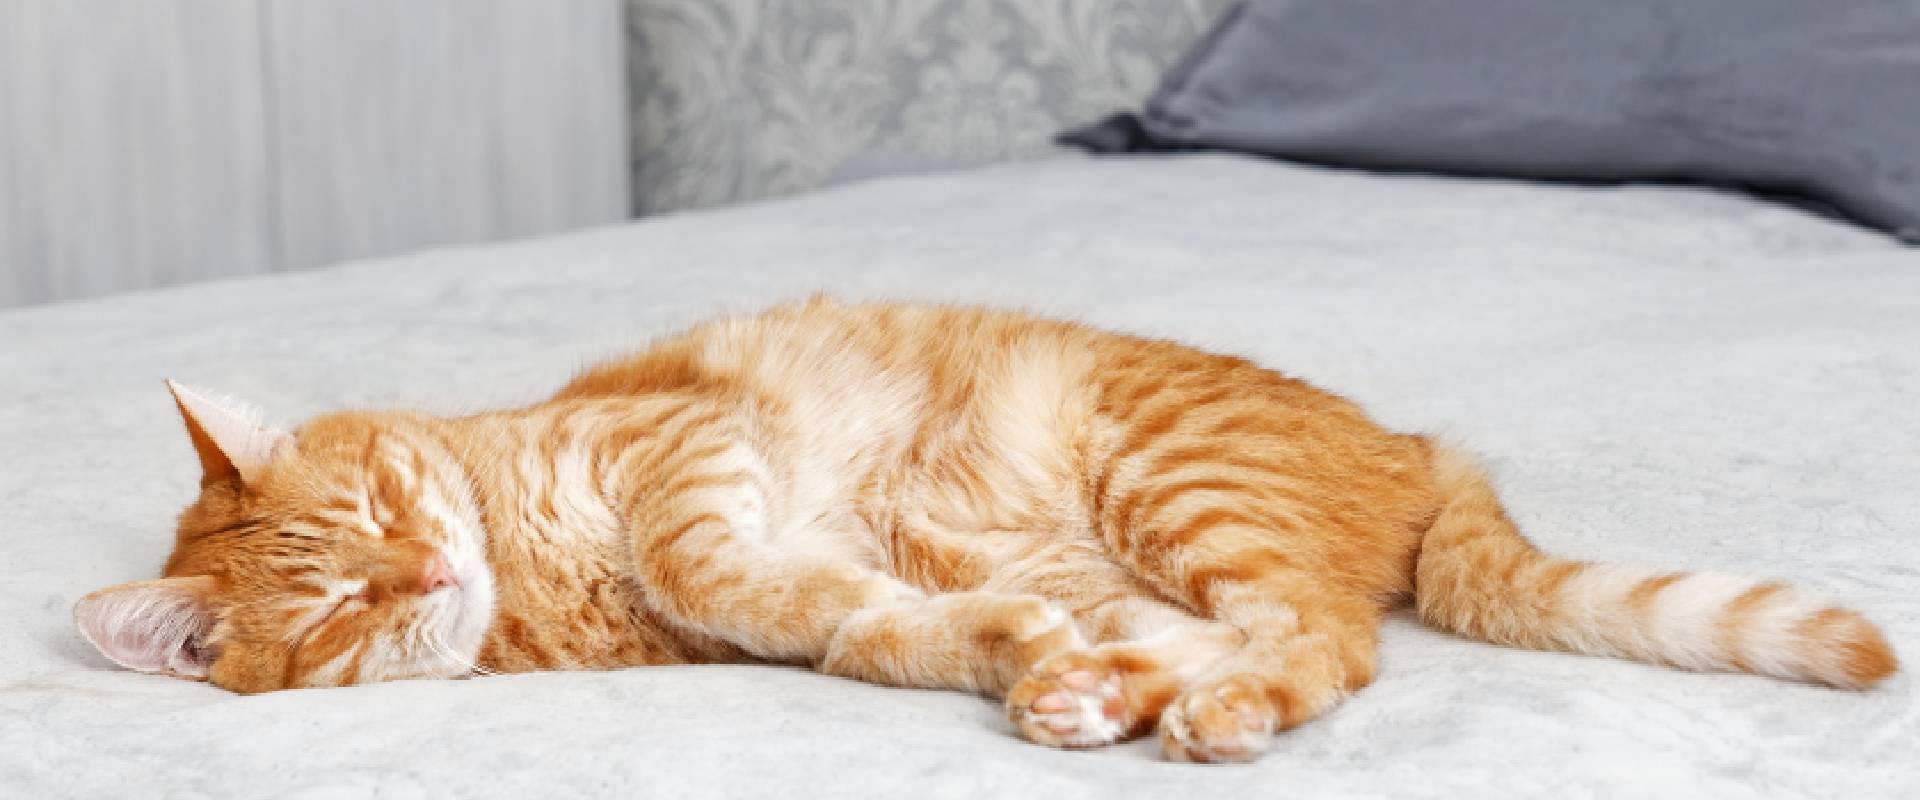 Ginger cat sleeping on a bed